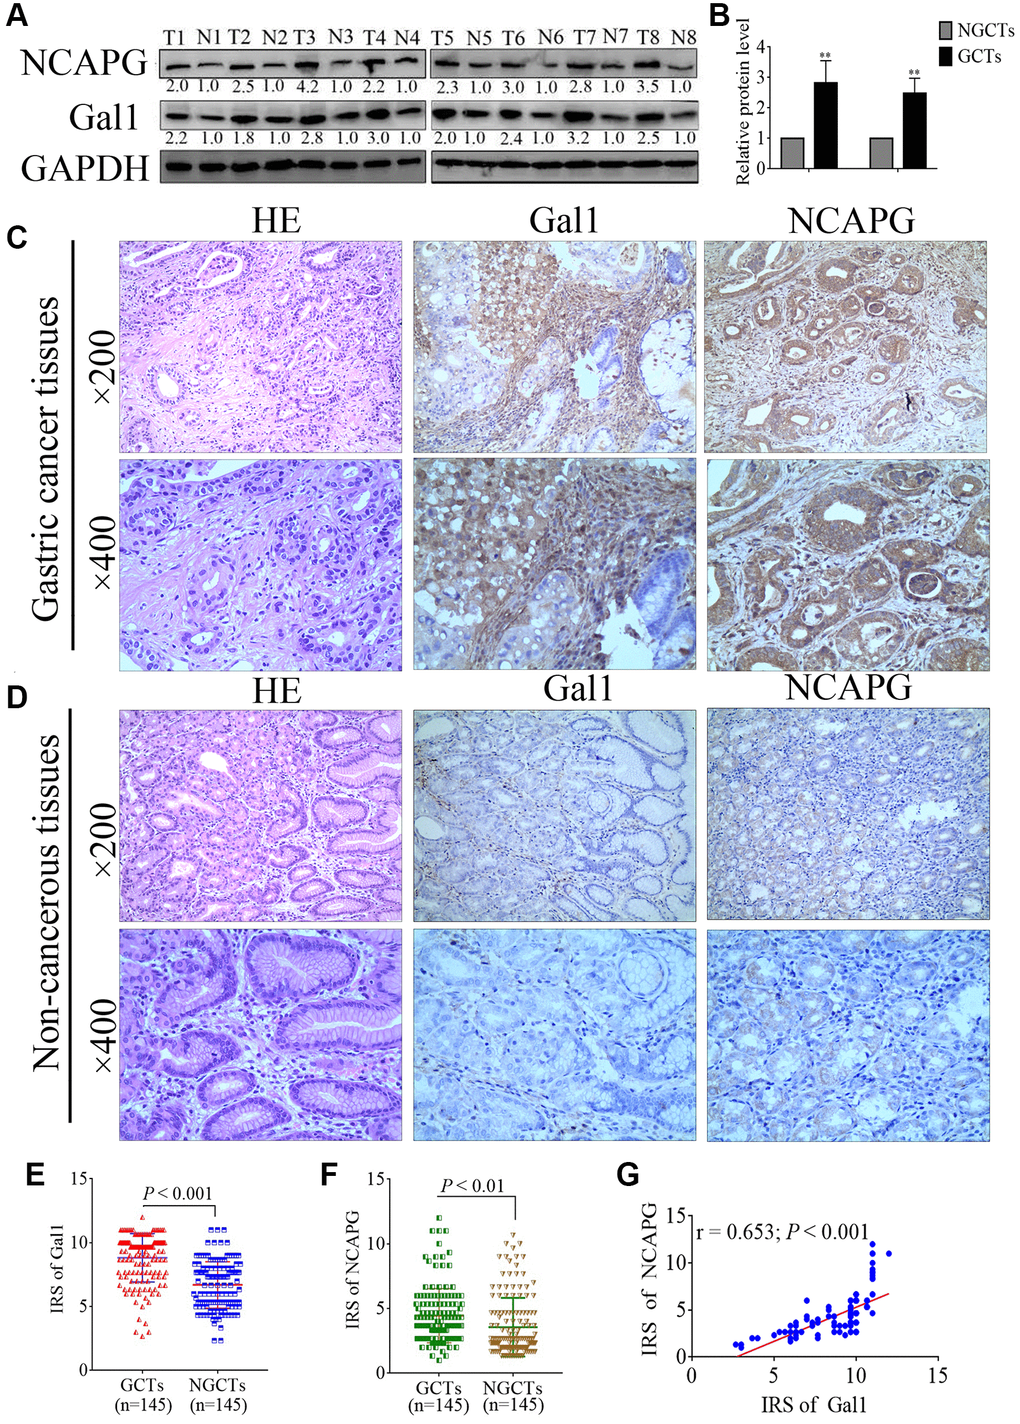 Gal1 and NCAPG expression predict prognosis of gastric cancer (GC). (A, B) Expression of Gal1 and NCAPG proteins detected by Western blotting in GC cancer tissues (GCTs) and non-gastric cancer tissues (NGCTs). (C, D) Representative immunohistochemistry images for Gal1 and NCAPG in (C) GC tissues, and (D) matched non-cancerous tissues. (E) Immunoreactivity score (IRS) for Gal1 compared between GCTs and matched NGCTs. (F) IRS for NCAPG compared between GCTs and matched NGCTs. (G) The expression of Gal1 was positively correlated with NCAPG expression in GC tissues. Abbreviations: T: tumor tissue; N: non-tumor tissue; GCTs: gastric cancer tissues; NGCTs: non- gastric cancer tissues. **P 